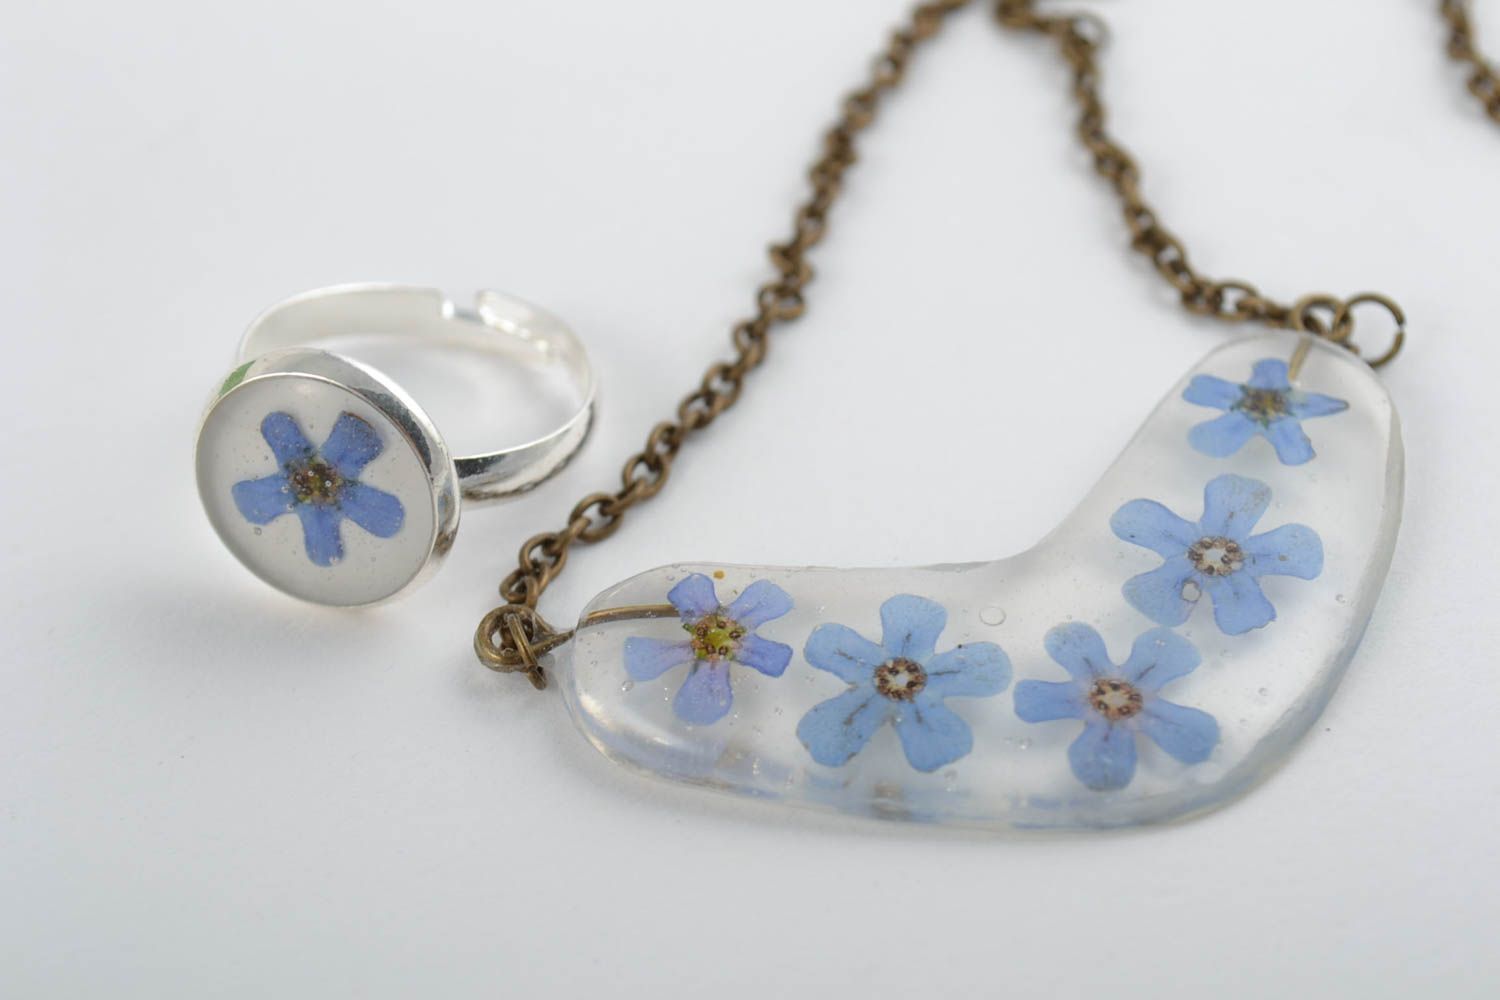 Handmade real flowers in epoxy resin jewelry set 2 items ring and pendant photo 2